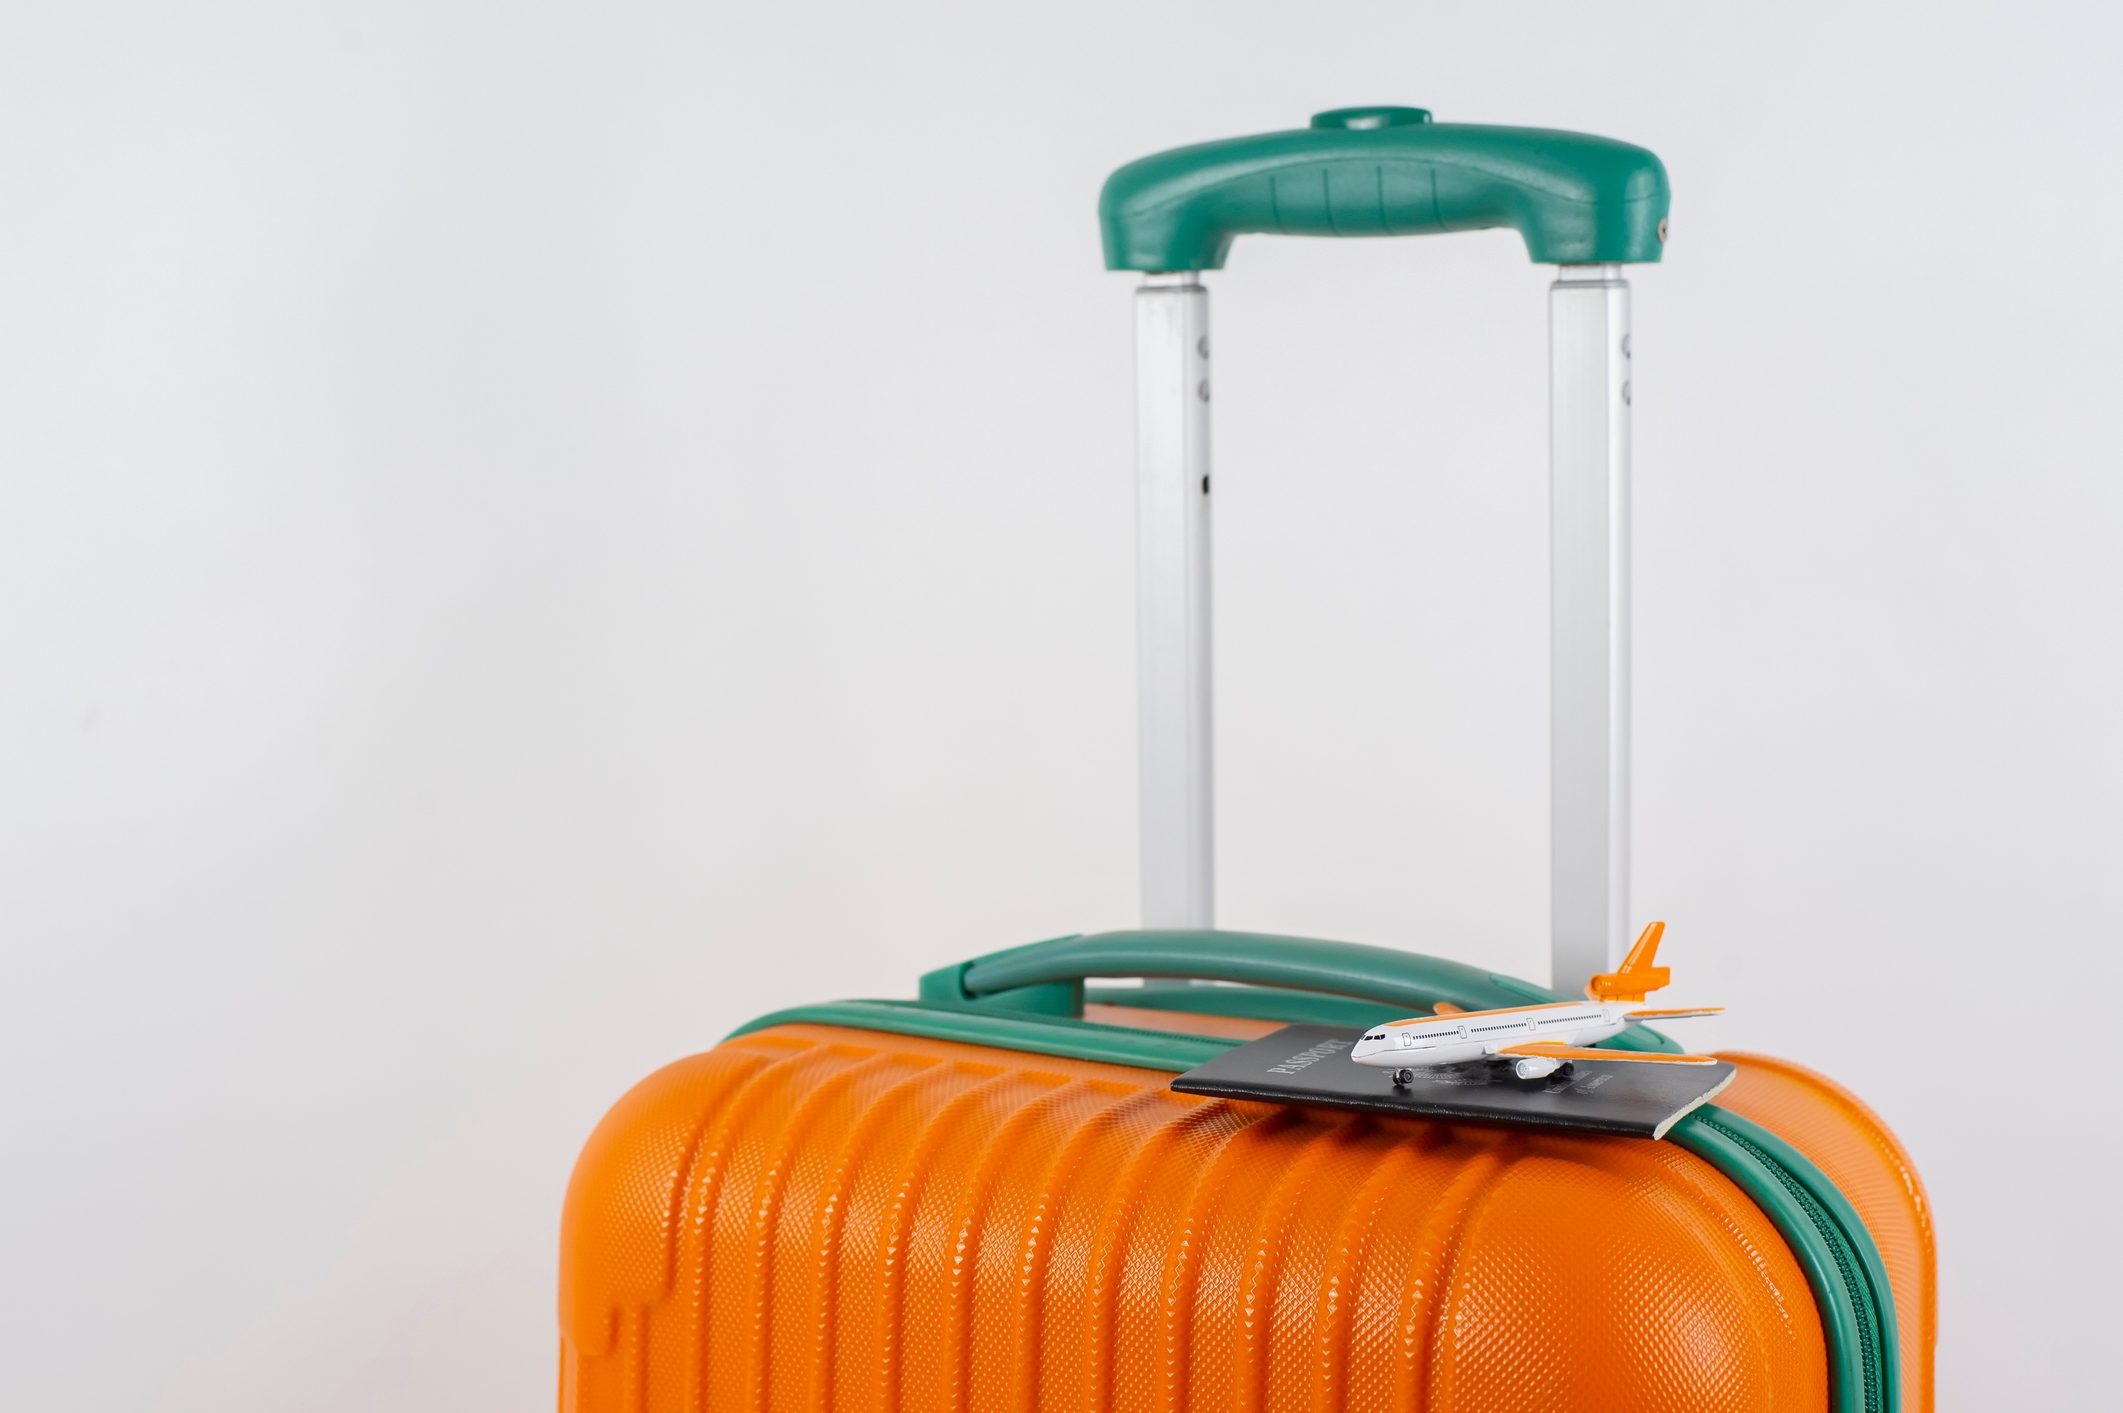 <p>Whether you're traveling for work or jetting off to a dreamy locale, you might stress about making <a href="https://www.rd.com/list/packing-mistakes/" rel="noopener noreferrer">packing mistakes</a>. Beyond not forgetting the essentials, it's smart to pay special attention the <a href="https://www.rd.com/article/tsa-carry-on-rules/" rel="noopener noreferrer">TSA carry-on rules</a>—especially the <a href="https://www.rd.com/list/items-over-3-4-ounces-that-can-still-go-in-your-carry-on/" rel="noopener noreferrer">TSA liquid limit</a> and <a href="https://www.rd.com/list/foods-you-can-and-cant-take-on-plane/">food rules</a>—so you can get through the <a href="https://www.rd.com/list/what-tsa-agents-notice-first/" rel="noopener noreferrer">airport security check</a> quickly. You're probably also wondering, <em>What</em><em> can I take on a plane in checked lugg</em><em>age?</em> After all, you don't want TSA agents rifling through your bags if you can help it ... or, worse, having some of your things end up in the bin of <a href="https://www.rd.com/article/return-confiscated-items-tsa/" rel="noopener noreferrer">TSA confiscated items</a>.</p> <p>Well, we have good news for you. "People think that TSA just randomly opens up bags here and there—that is not the case," says Lorie Dankers, a TSA spokesperson for the Western U.S. region. "We rely on technology to look for certain things."</p> <p>Which things, exactly? We spoke to both the TSA and Federal Aviation Administration (FAA) to find out what you should avoid packing to make sure you stay on the right side of their checked luggage rules.</p>